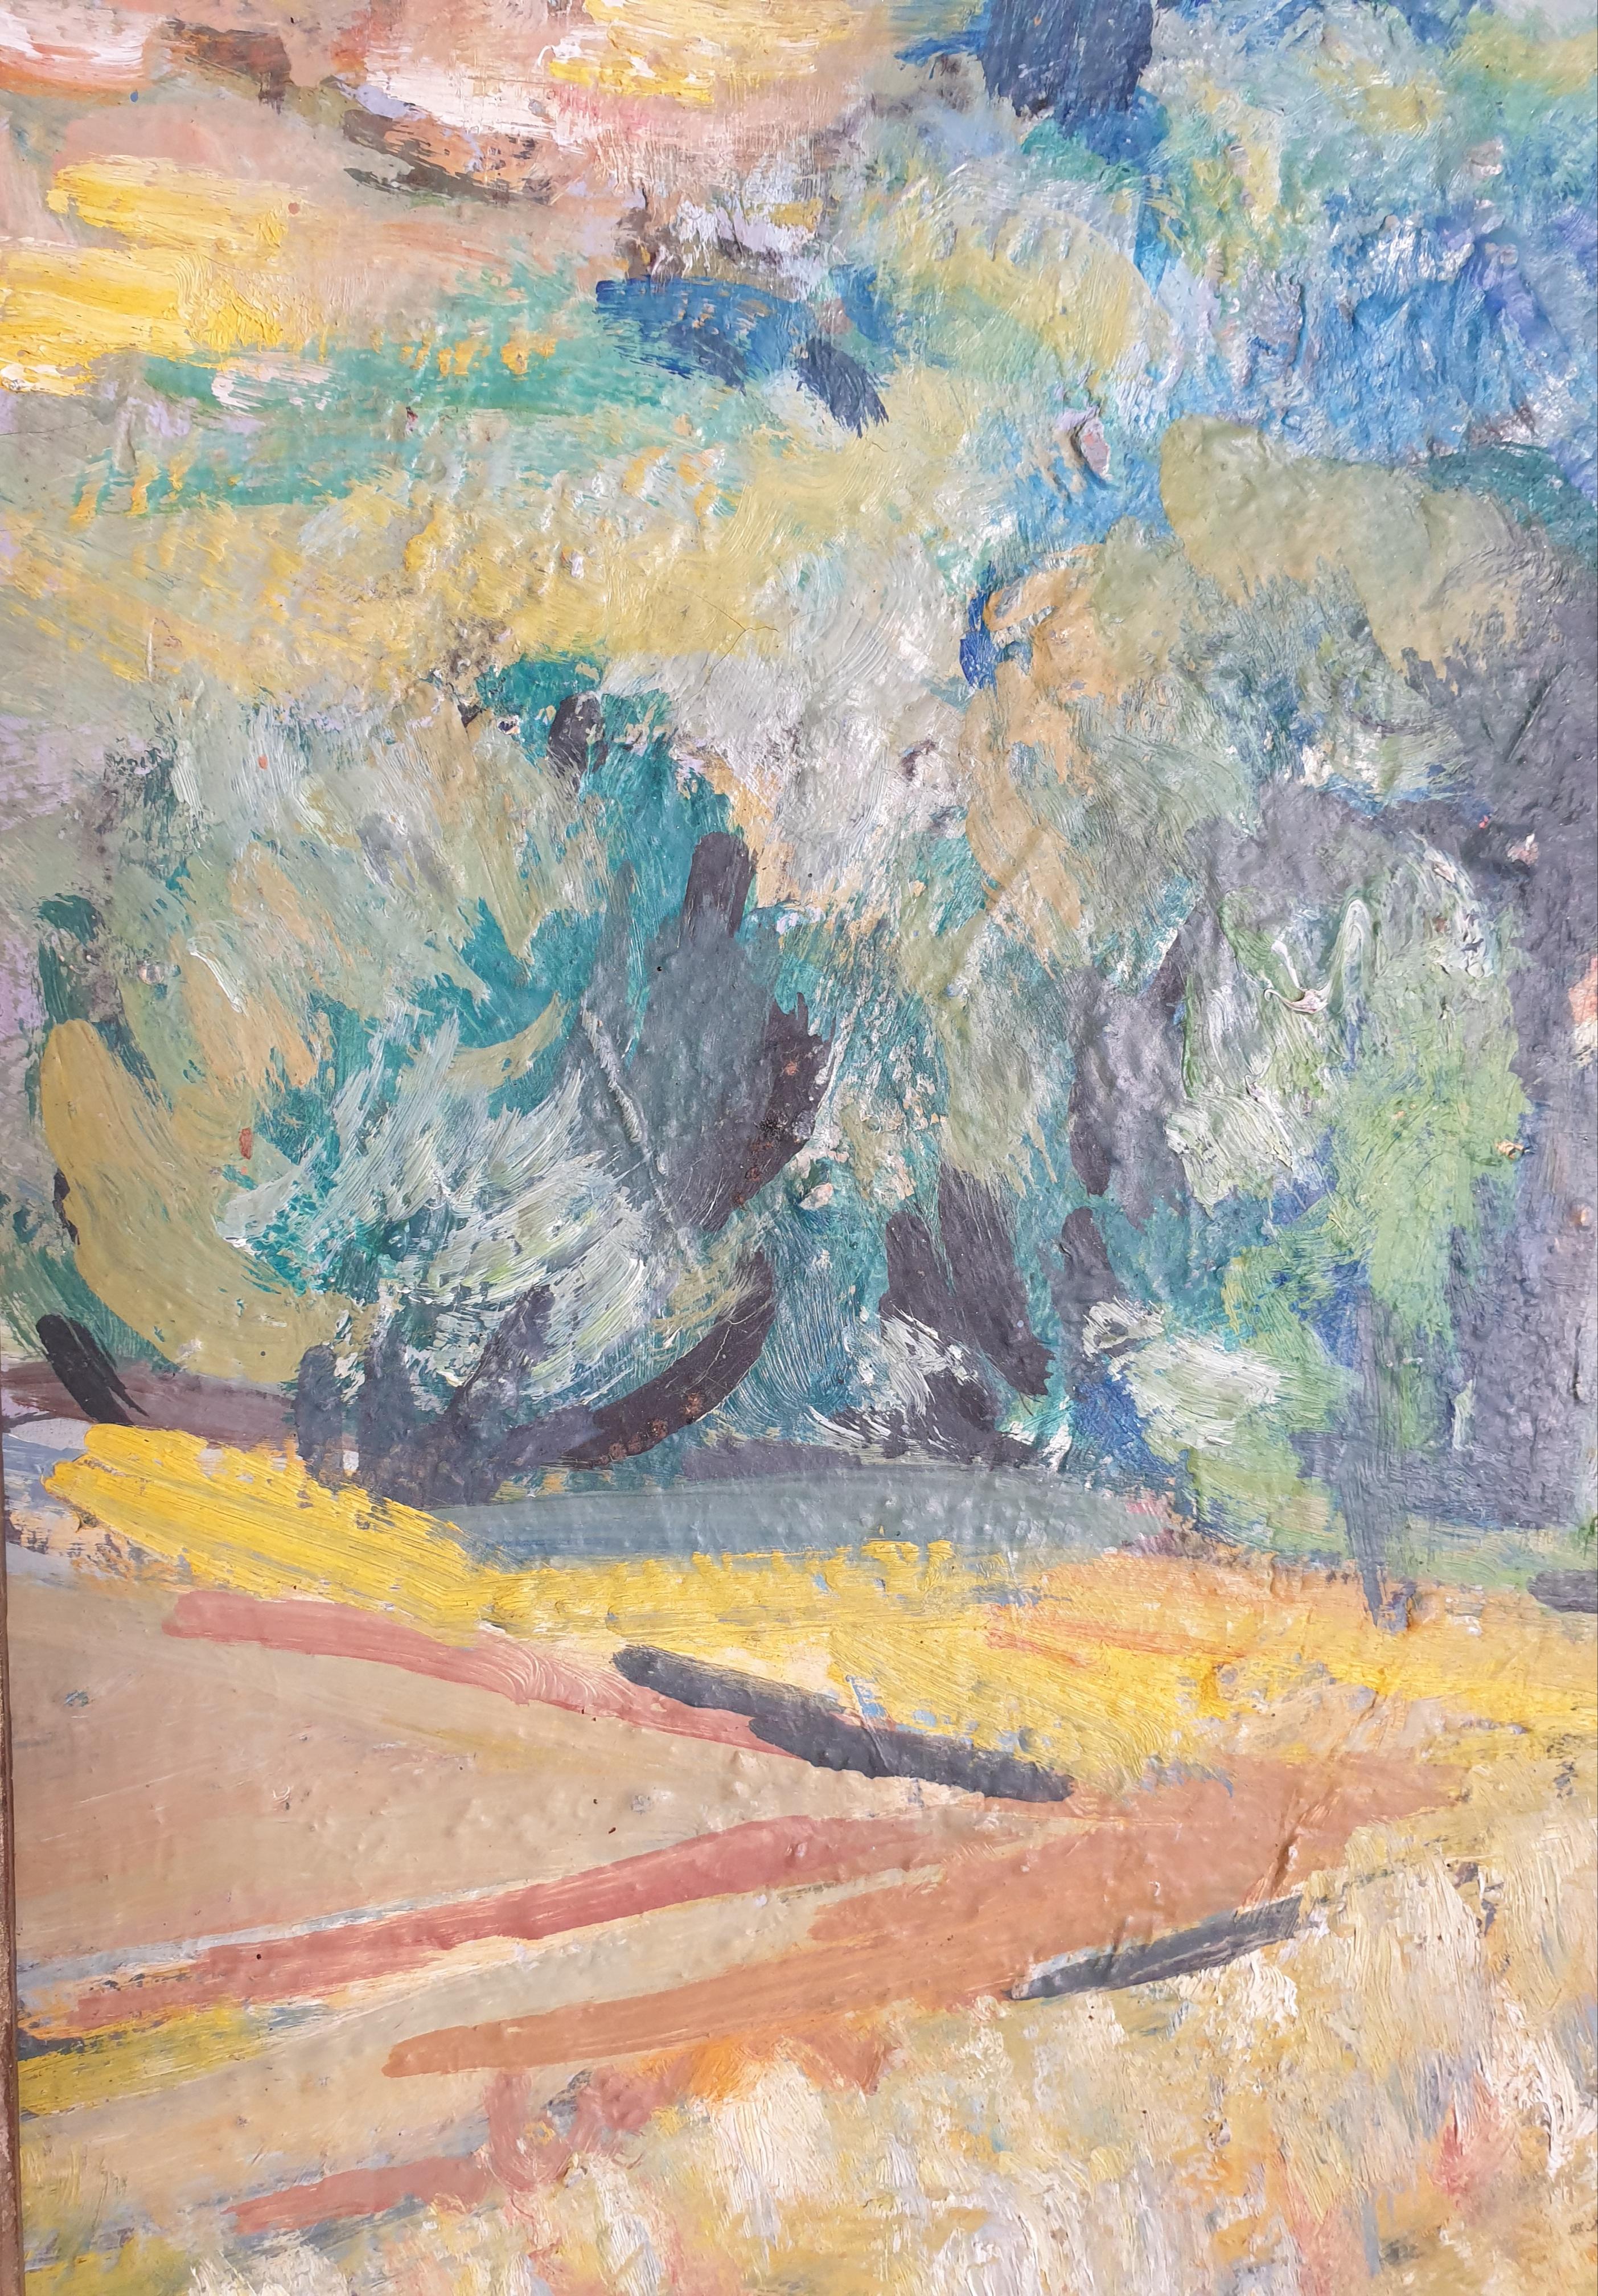 Mid-century Fauvist Landscape in the South of France.  3